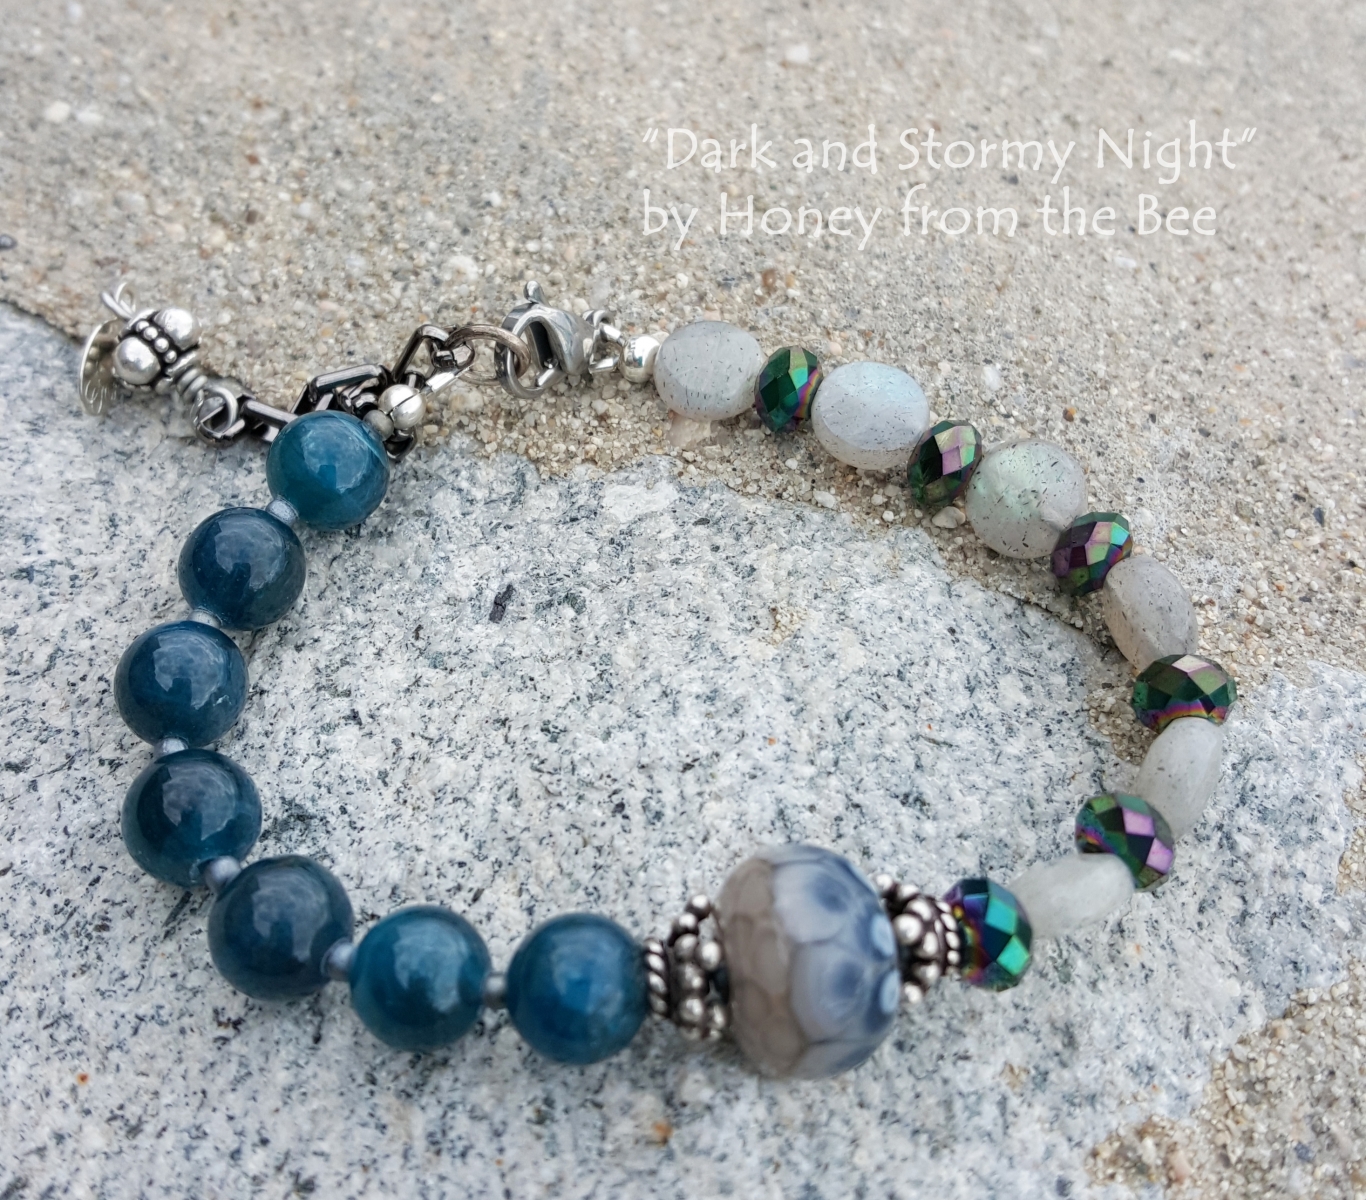 Apatite and Labradorite bracelet in grey and teal